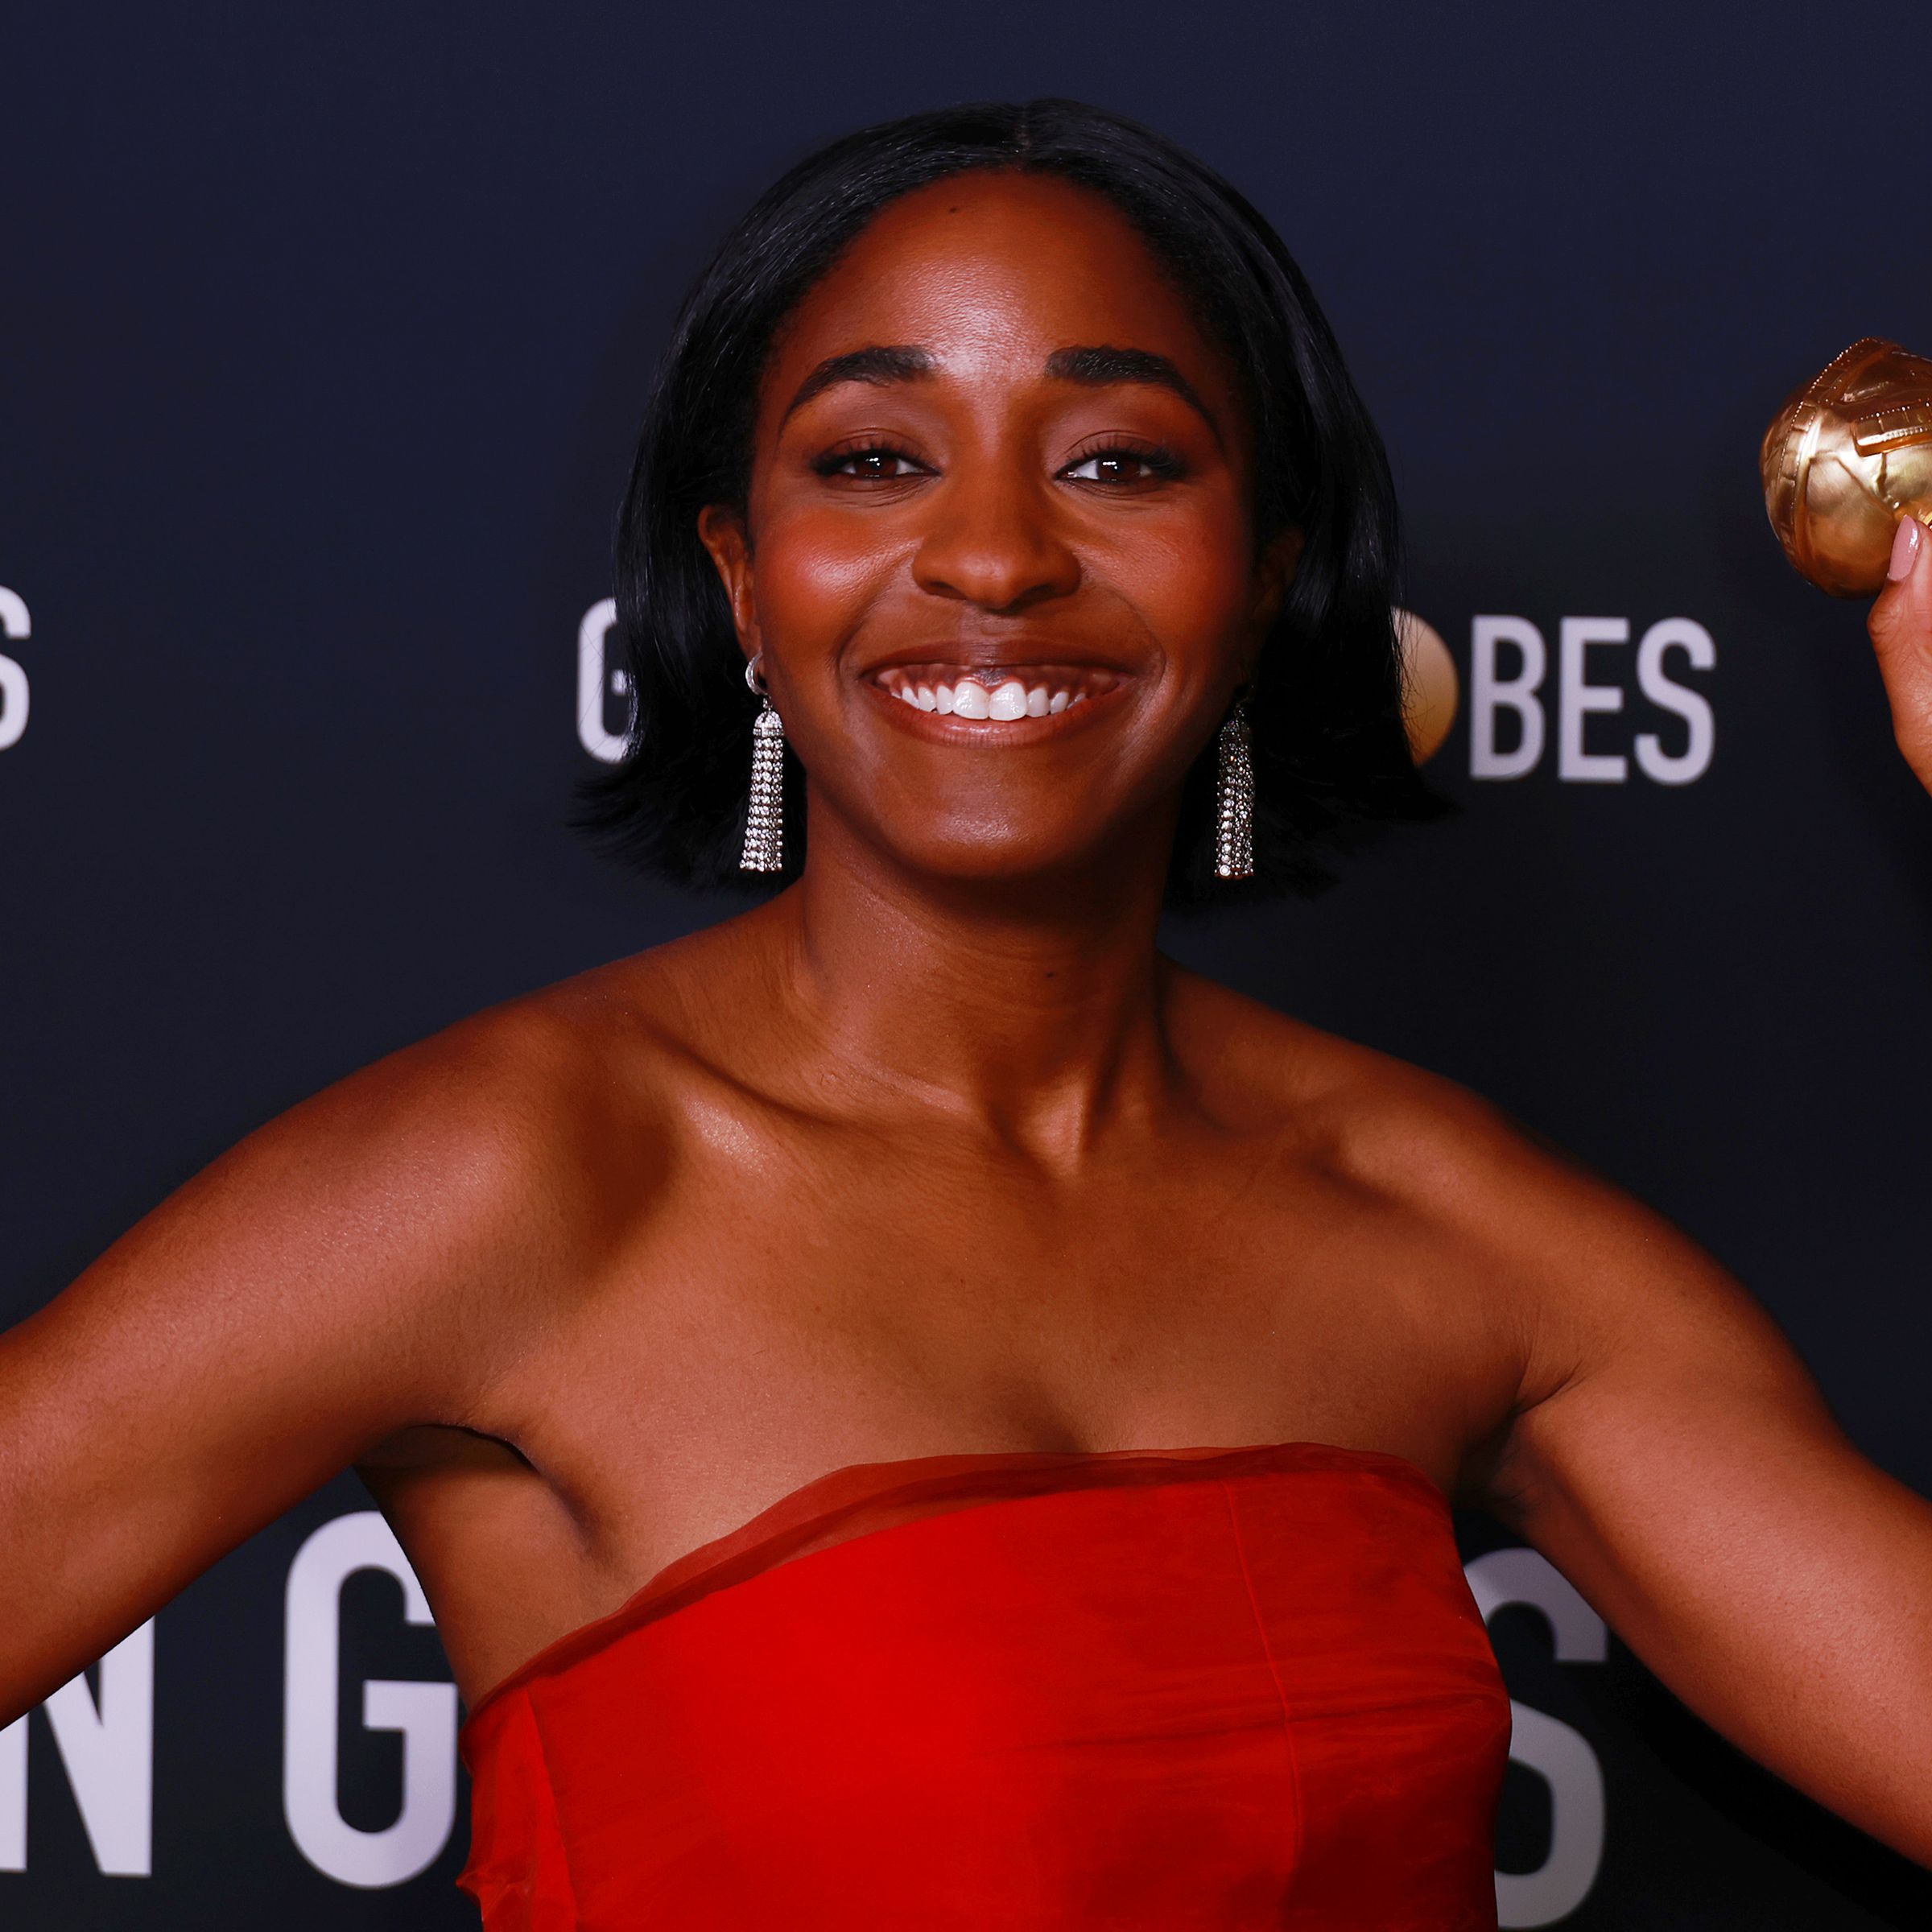 A Black woman with a bob smiling, wearing a strapless red dress and clutching a small golden statue topped with a globe in her upraised right arm.